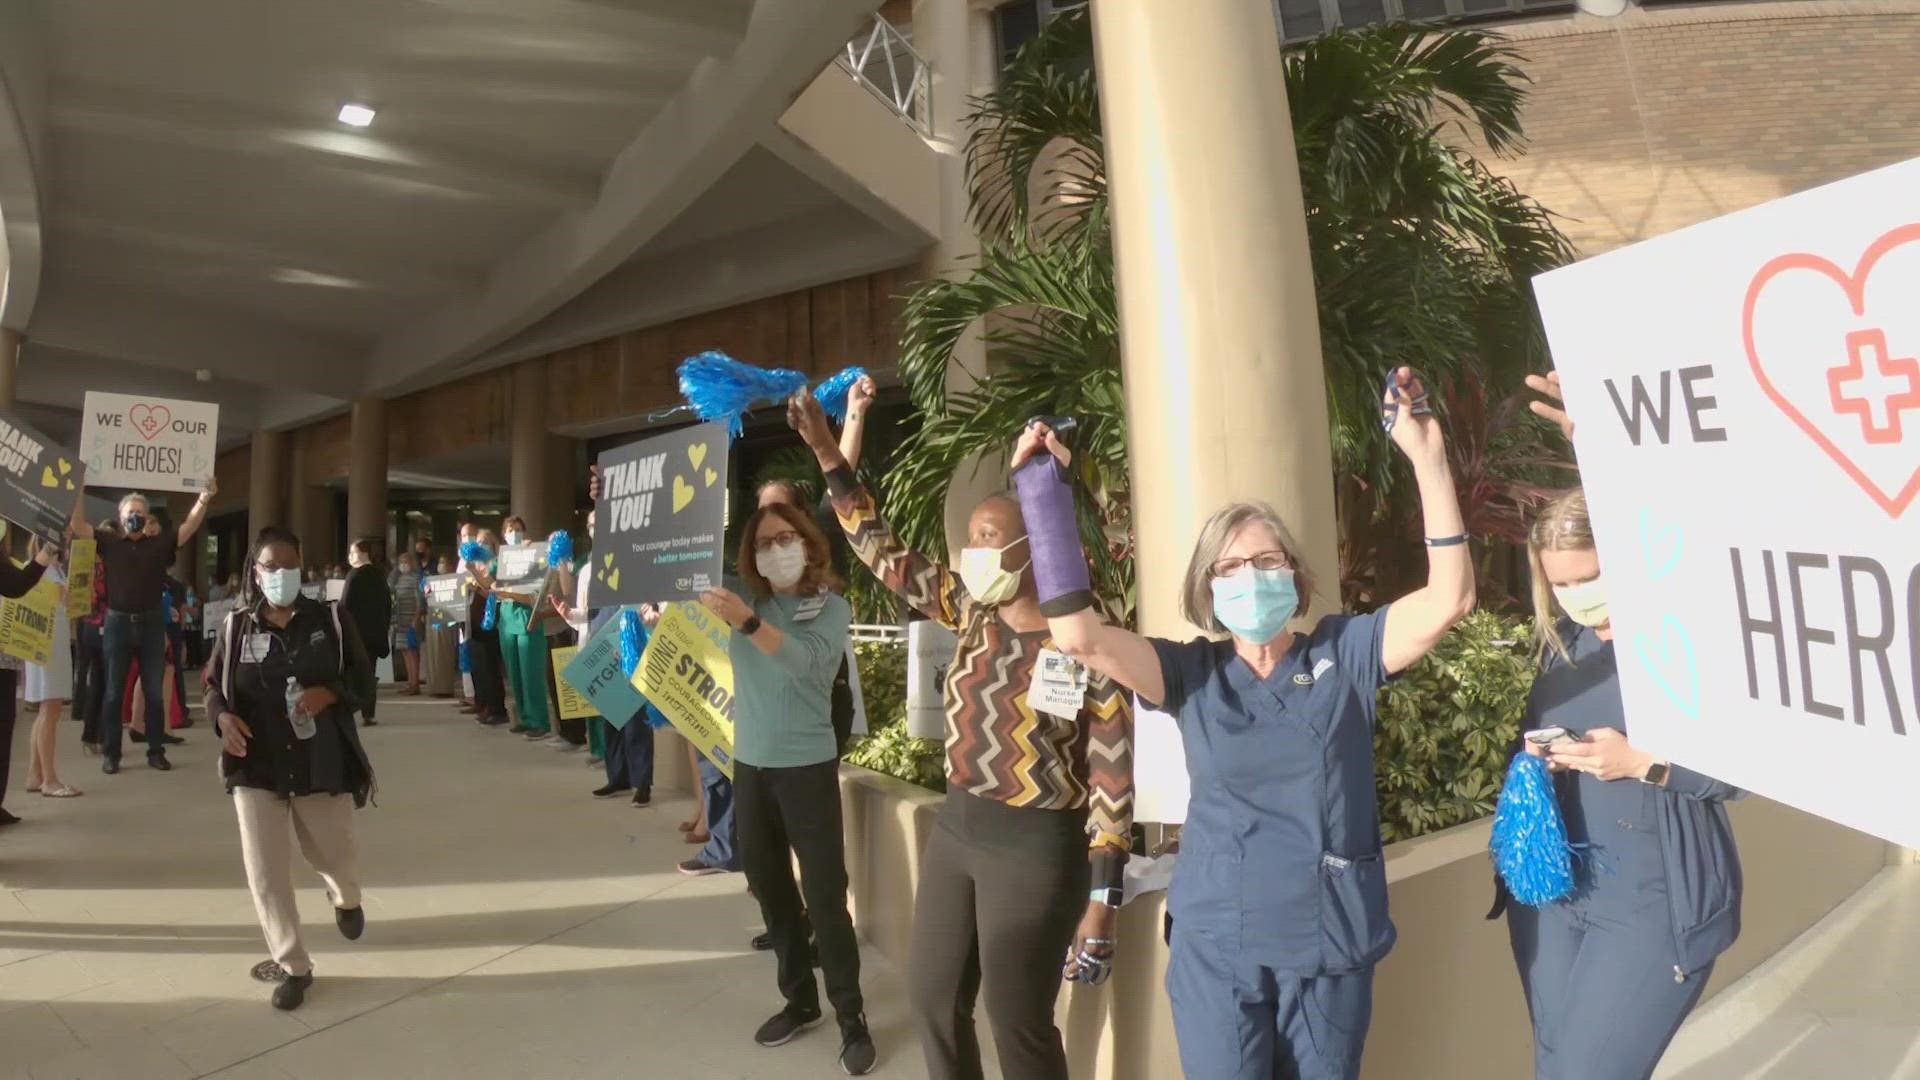 Hospital executives cheered, clapped, held signs and blasted music for the workers Thursday evening.